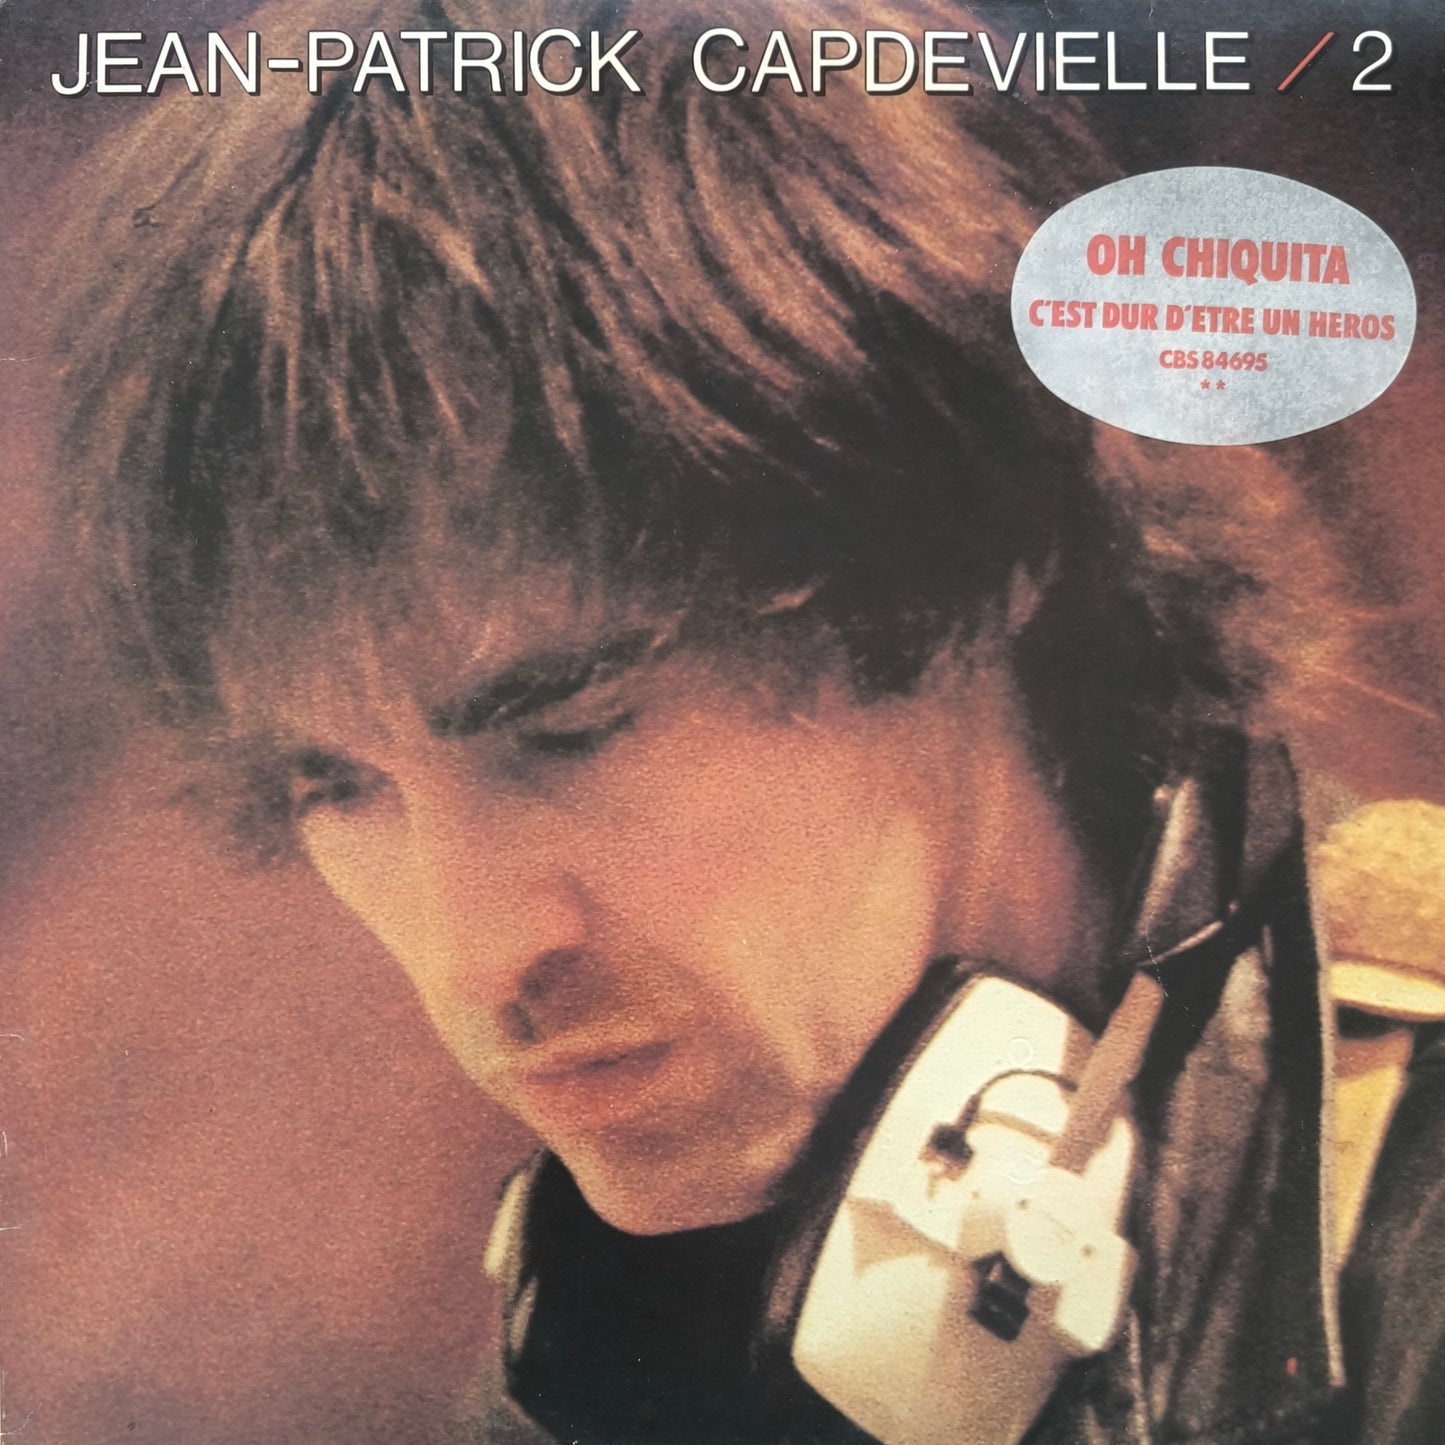 JEAN PATRICK CAPDEVIELLE - /2